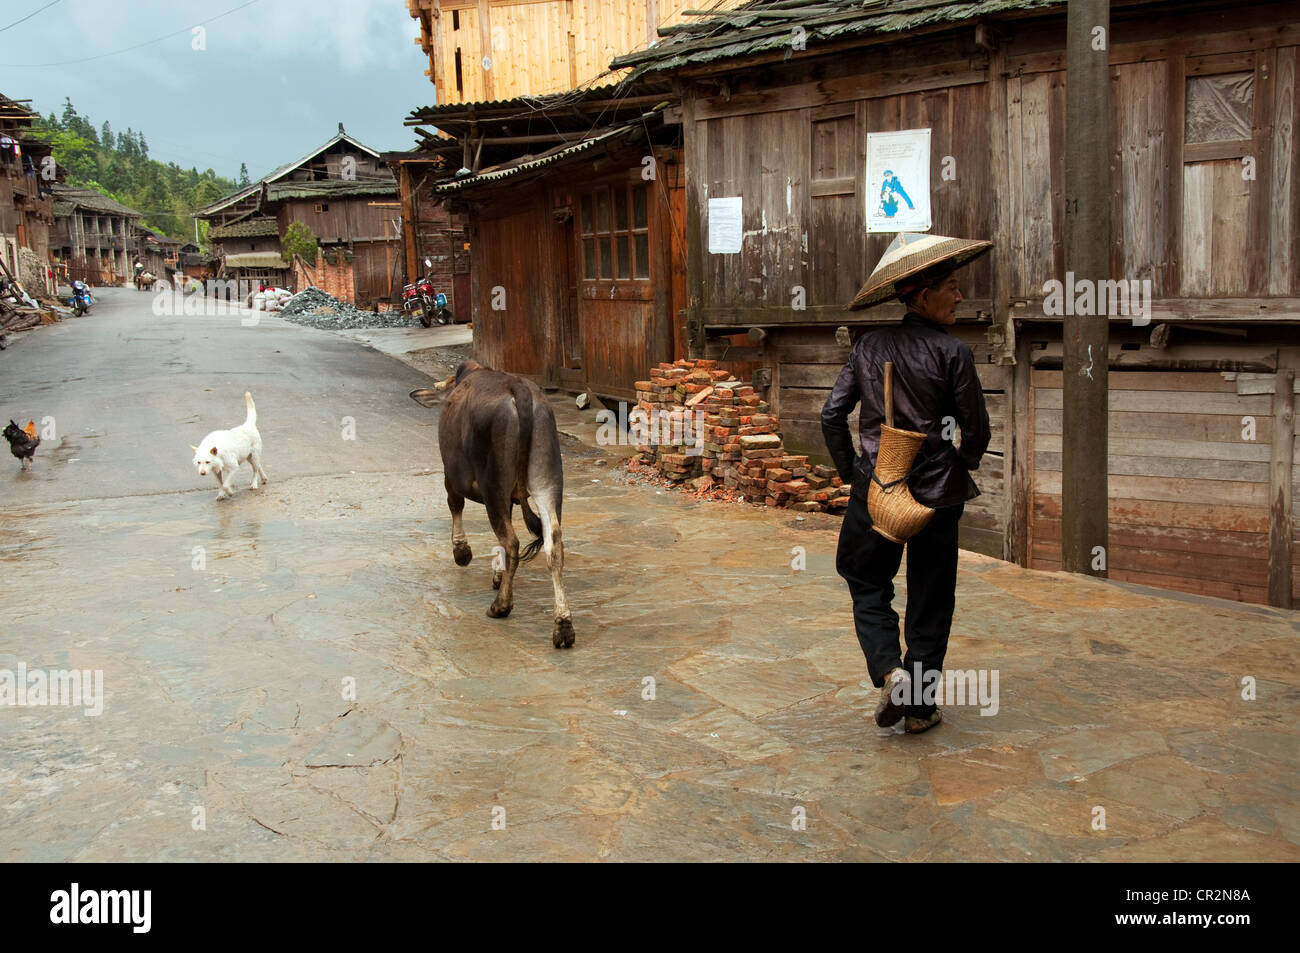 A Dong old man in traditional clothes with a billhook carrier and a conic hat, a veal and a white dog in the streets, Gaozheng Stock Photo